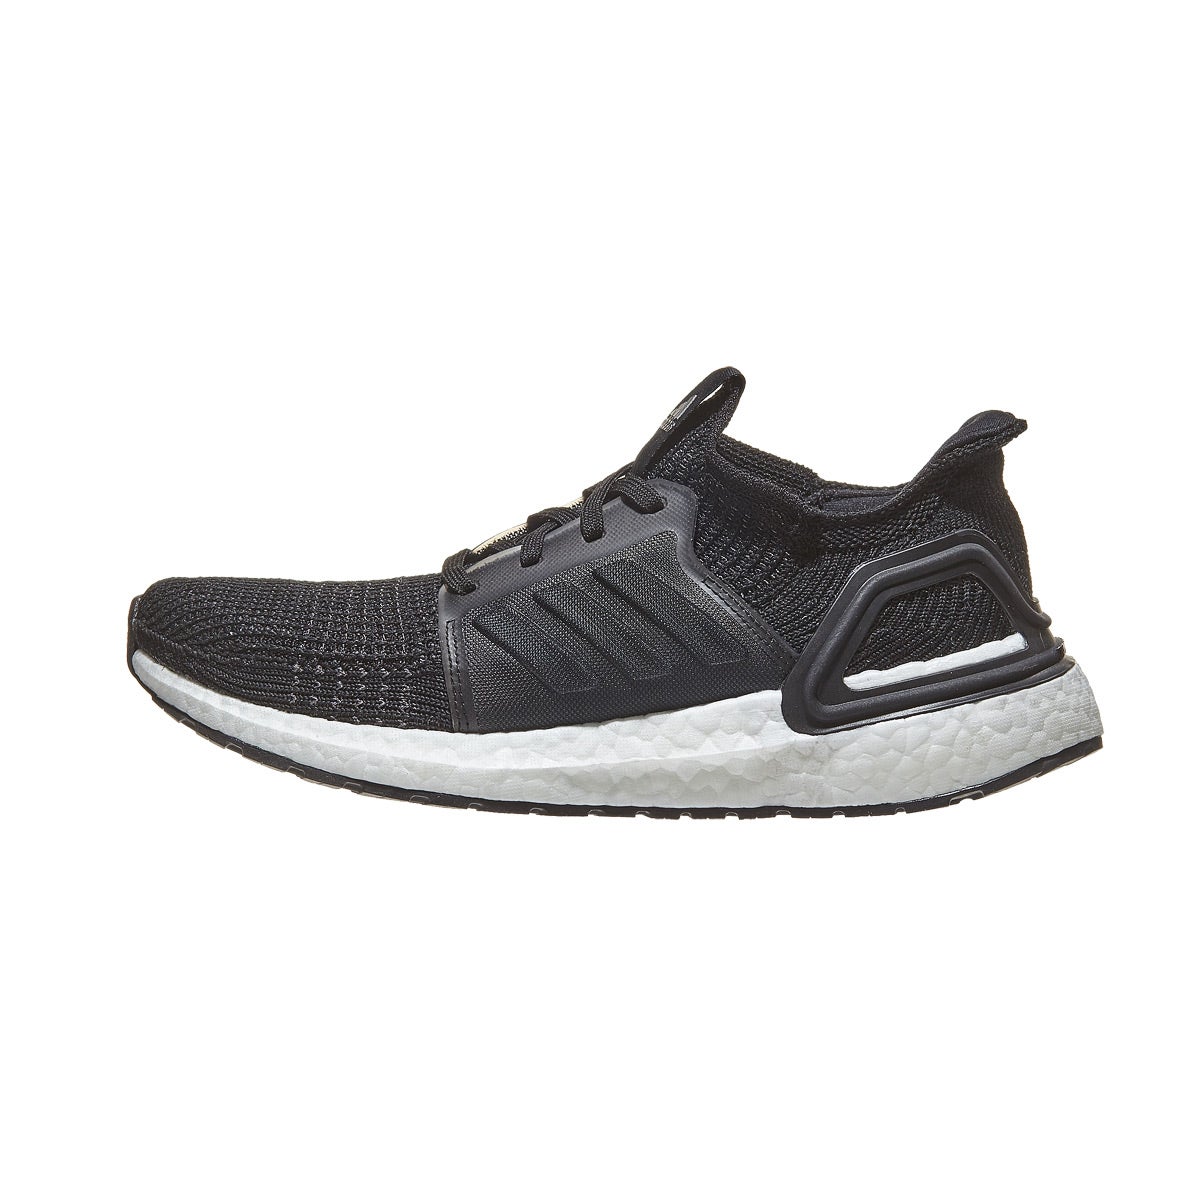 adidas Ultra Boost 19 Women's Shoes Black/White 360° View | Running ...